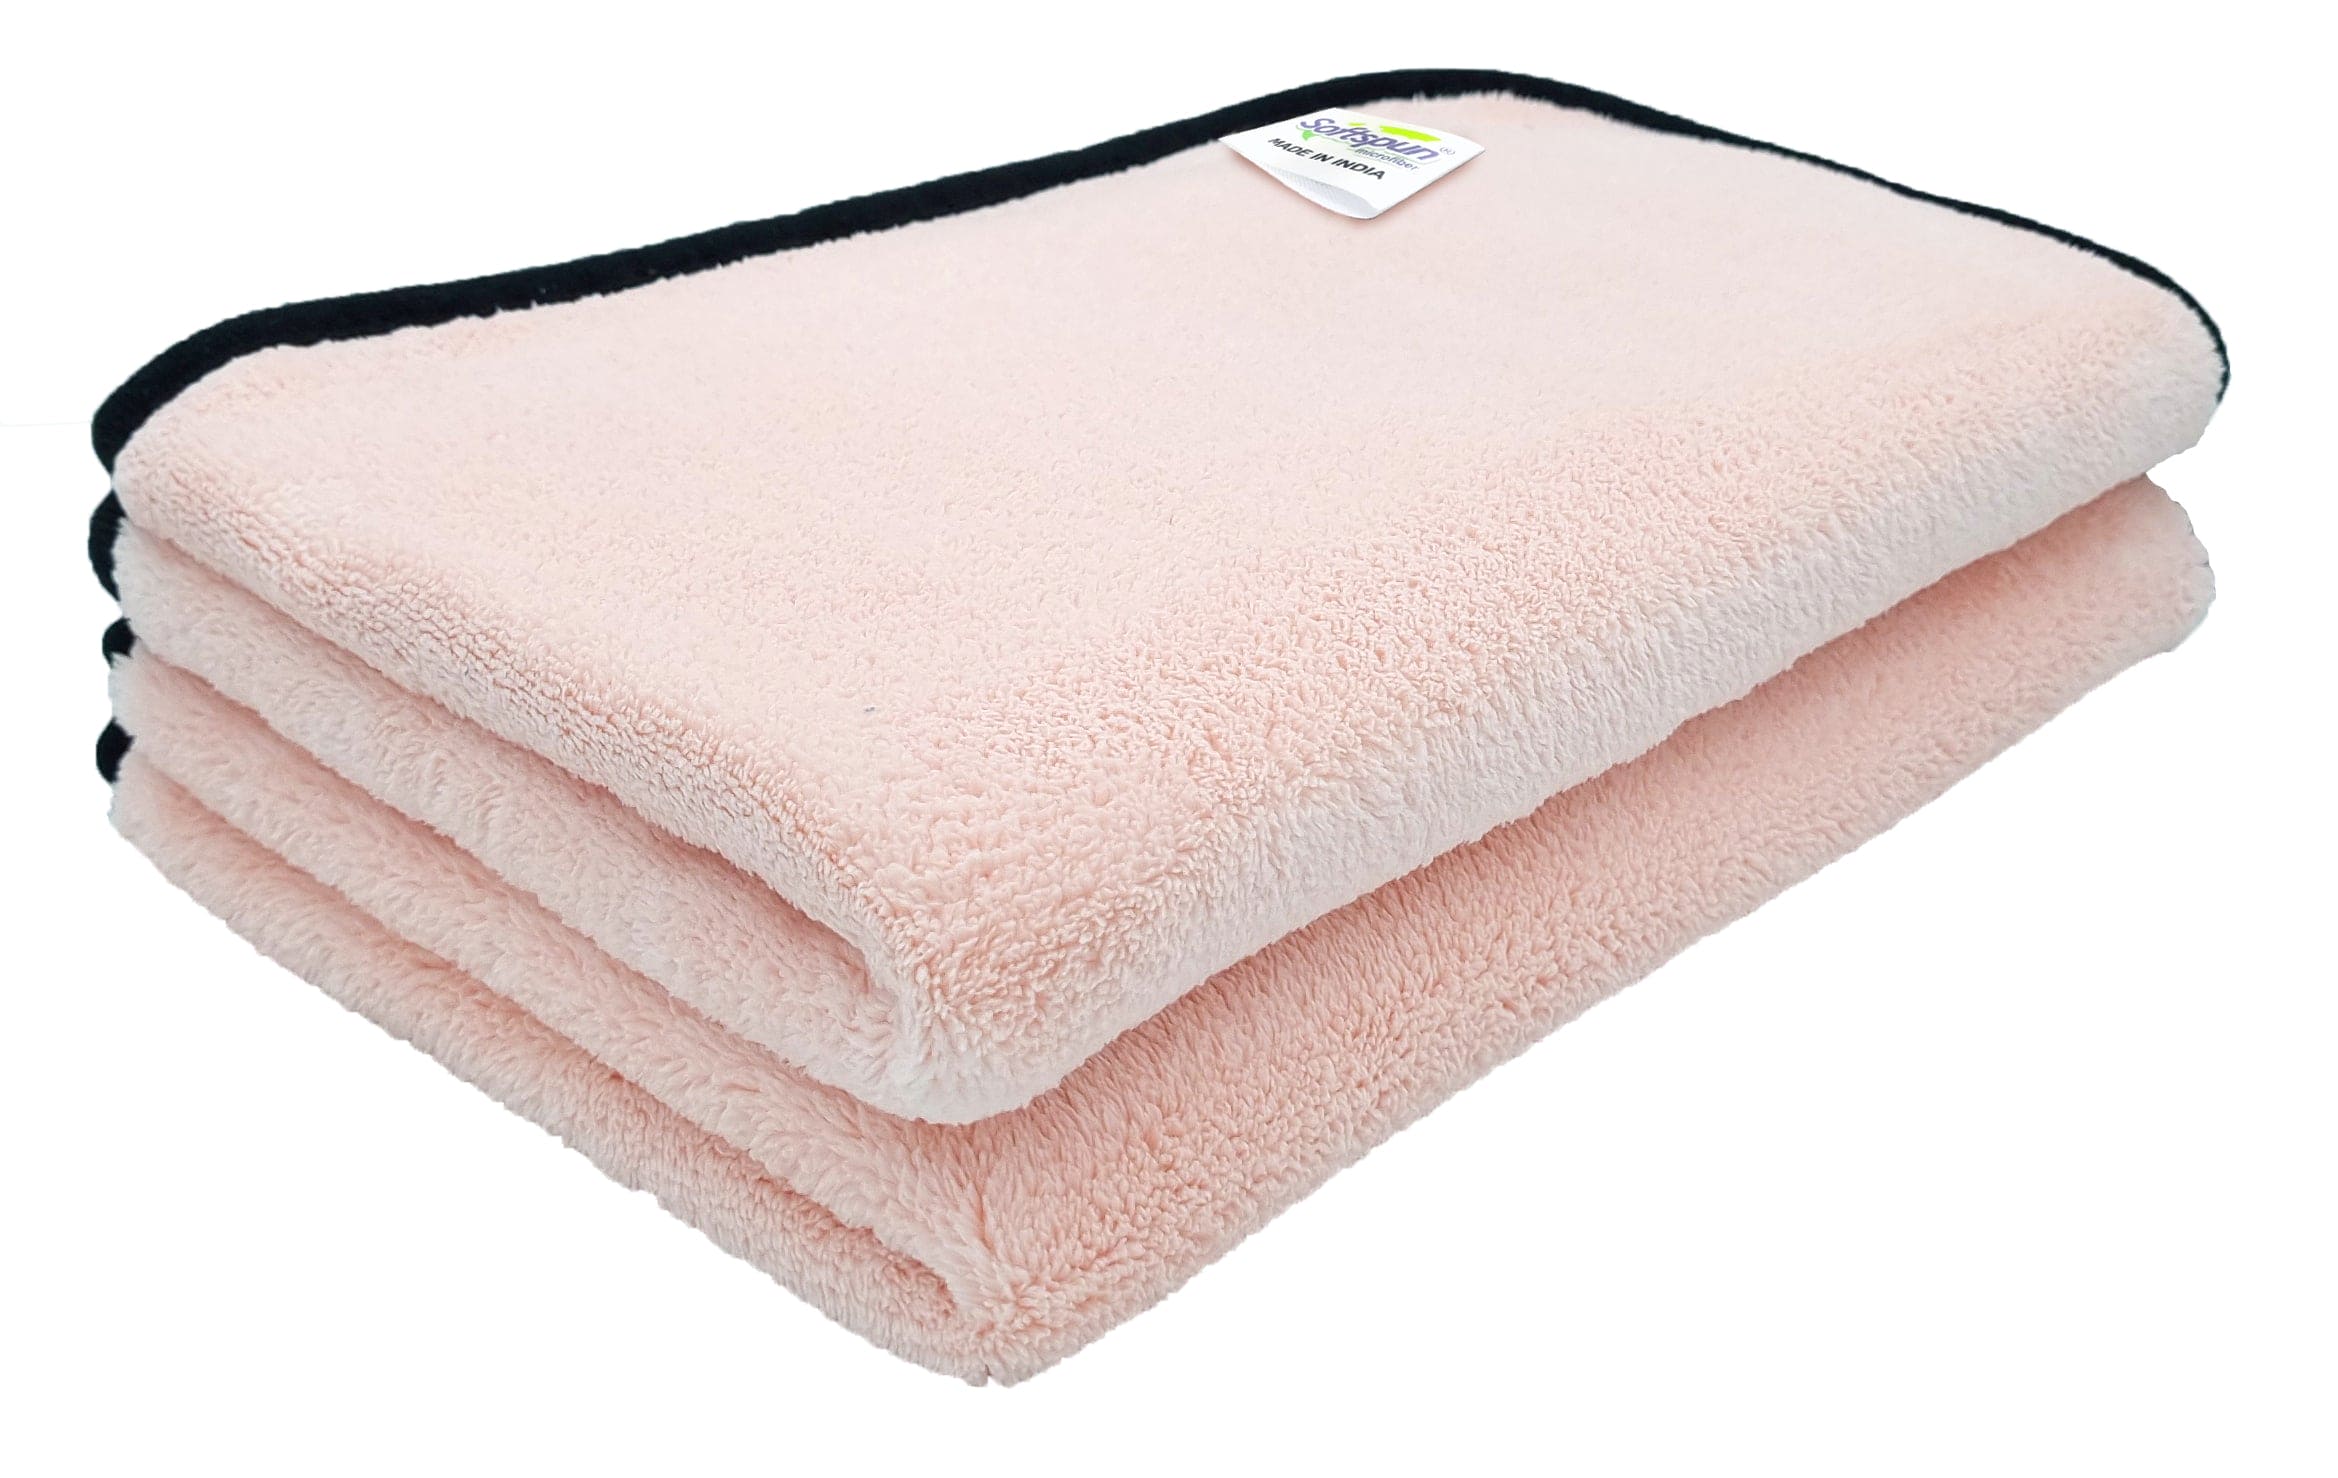 SOFTSPUN Microfiber Wipes Large Baby Towel 2 pc 40X60cm 280GSM  Ultra Absorbent Super Soft & Comfortable Quick Drying for Men & Women Daily Use Pack of 1 Extra Large Size Unisex.